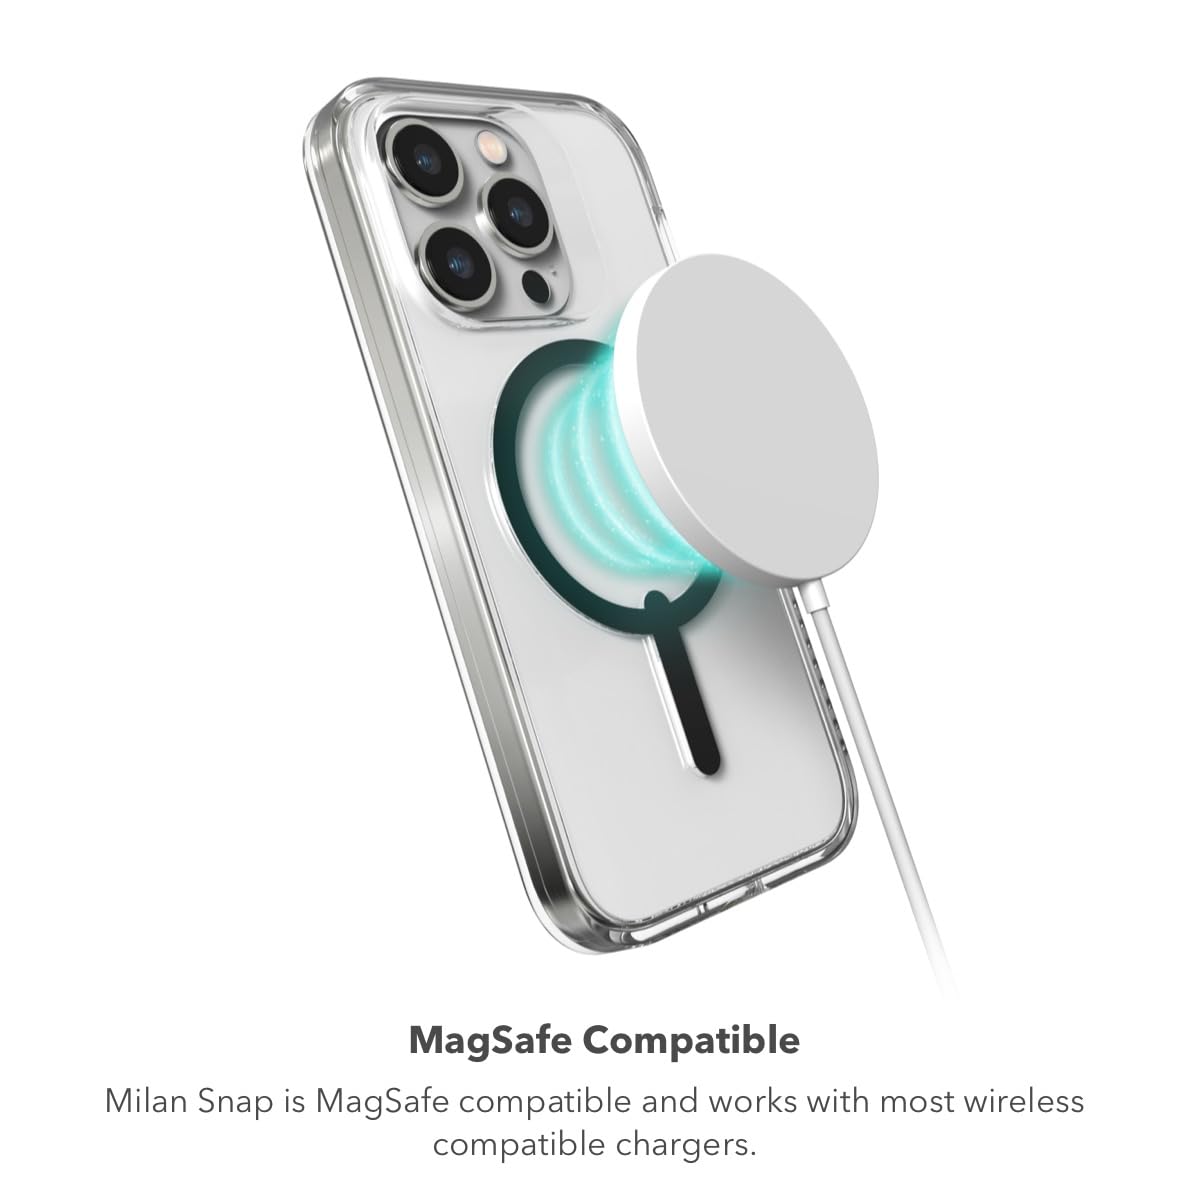 ZAGG Milan Snap iPhone 15 Pro Max - Drop Protection (13ft/4m), Durable Graphene Phone Case, Anti-Yellowing & Scratch-Resistant, Wireless Charging MagSafe Case, Ocean